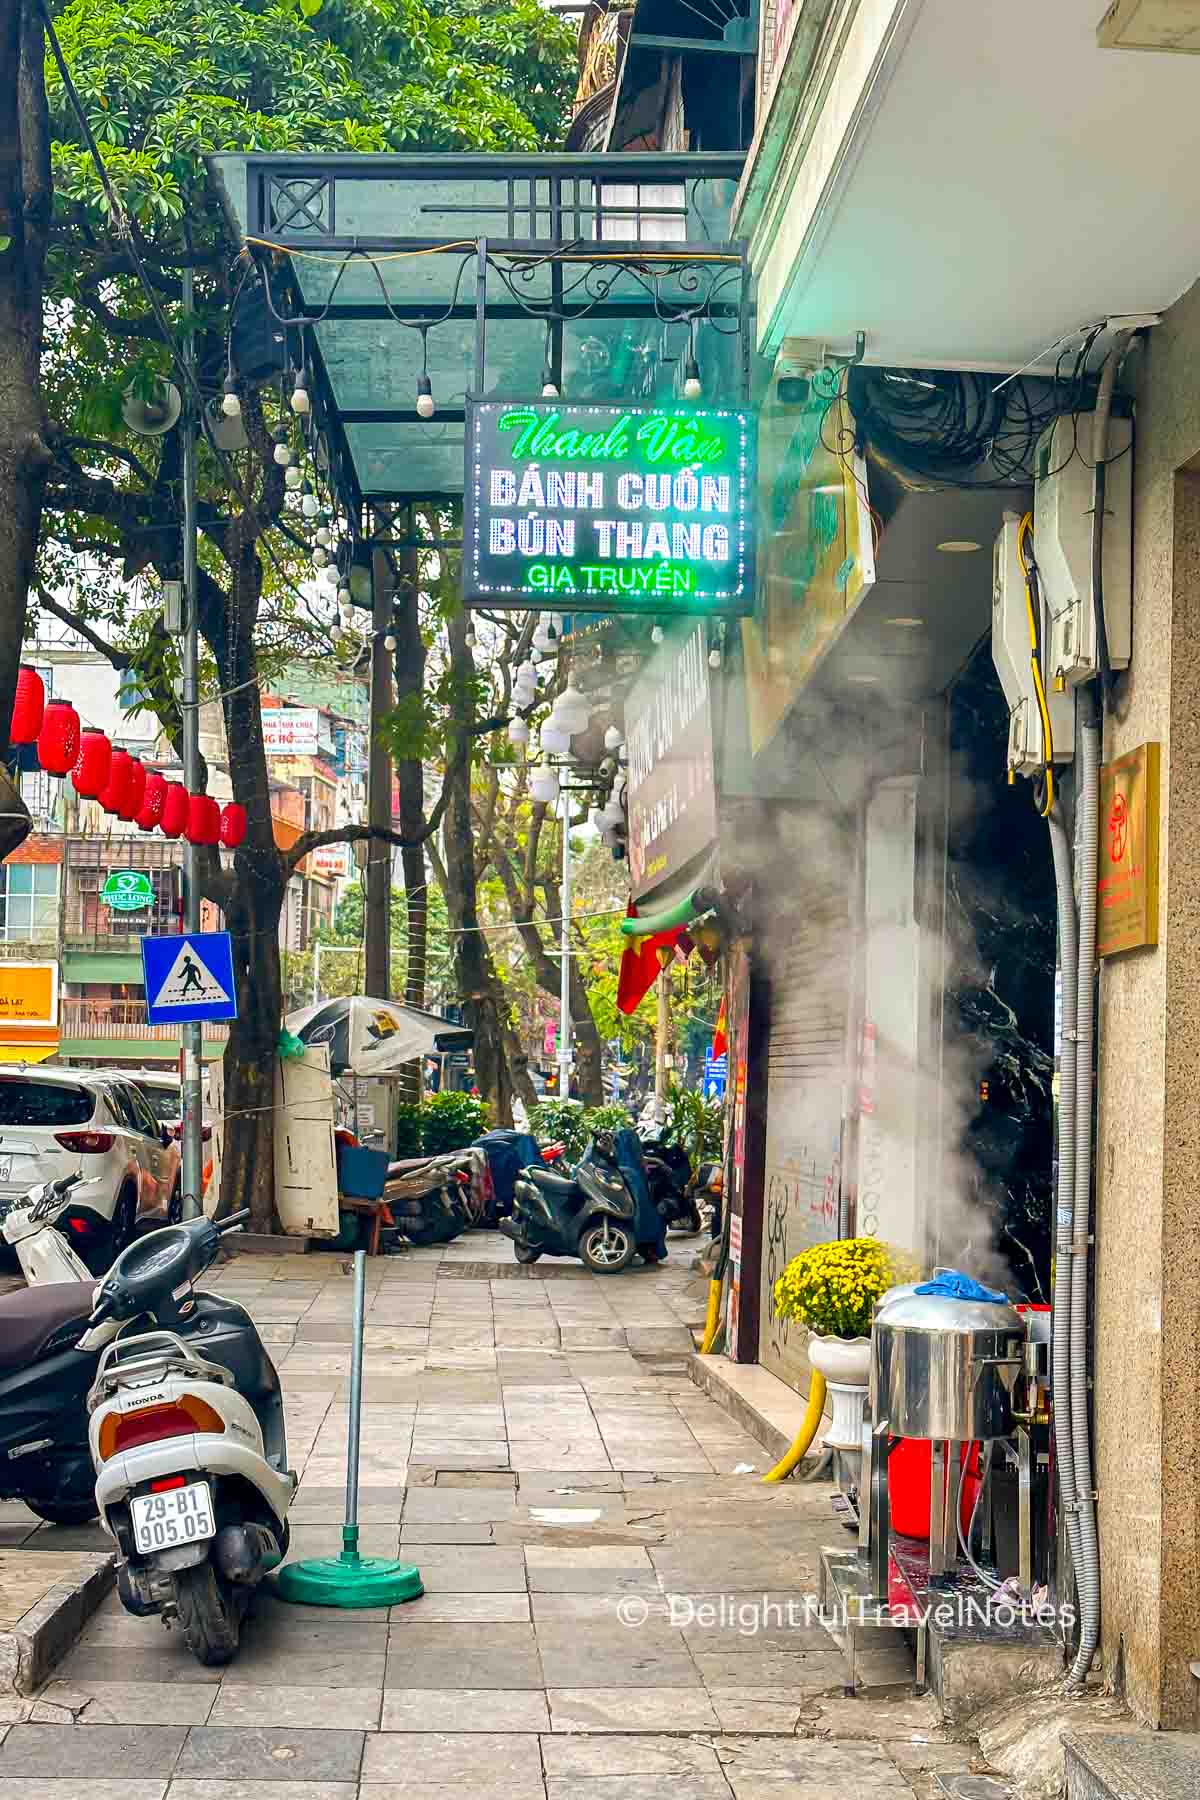 the front of Banh Cuon Thanh Van, one of the best street food restaurants in Hanoi.